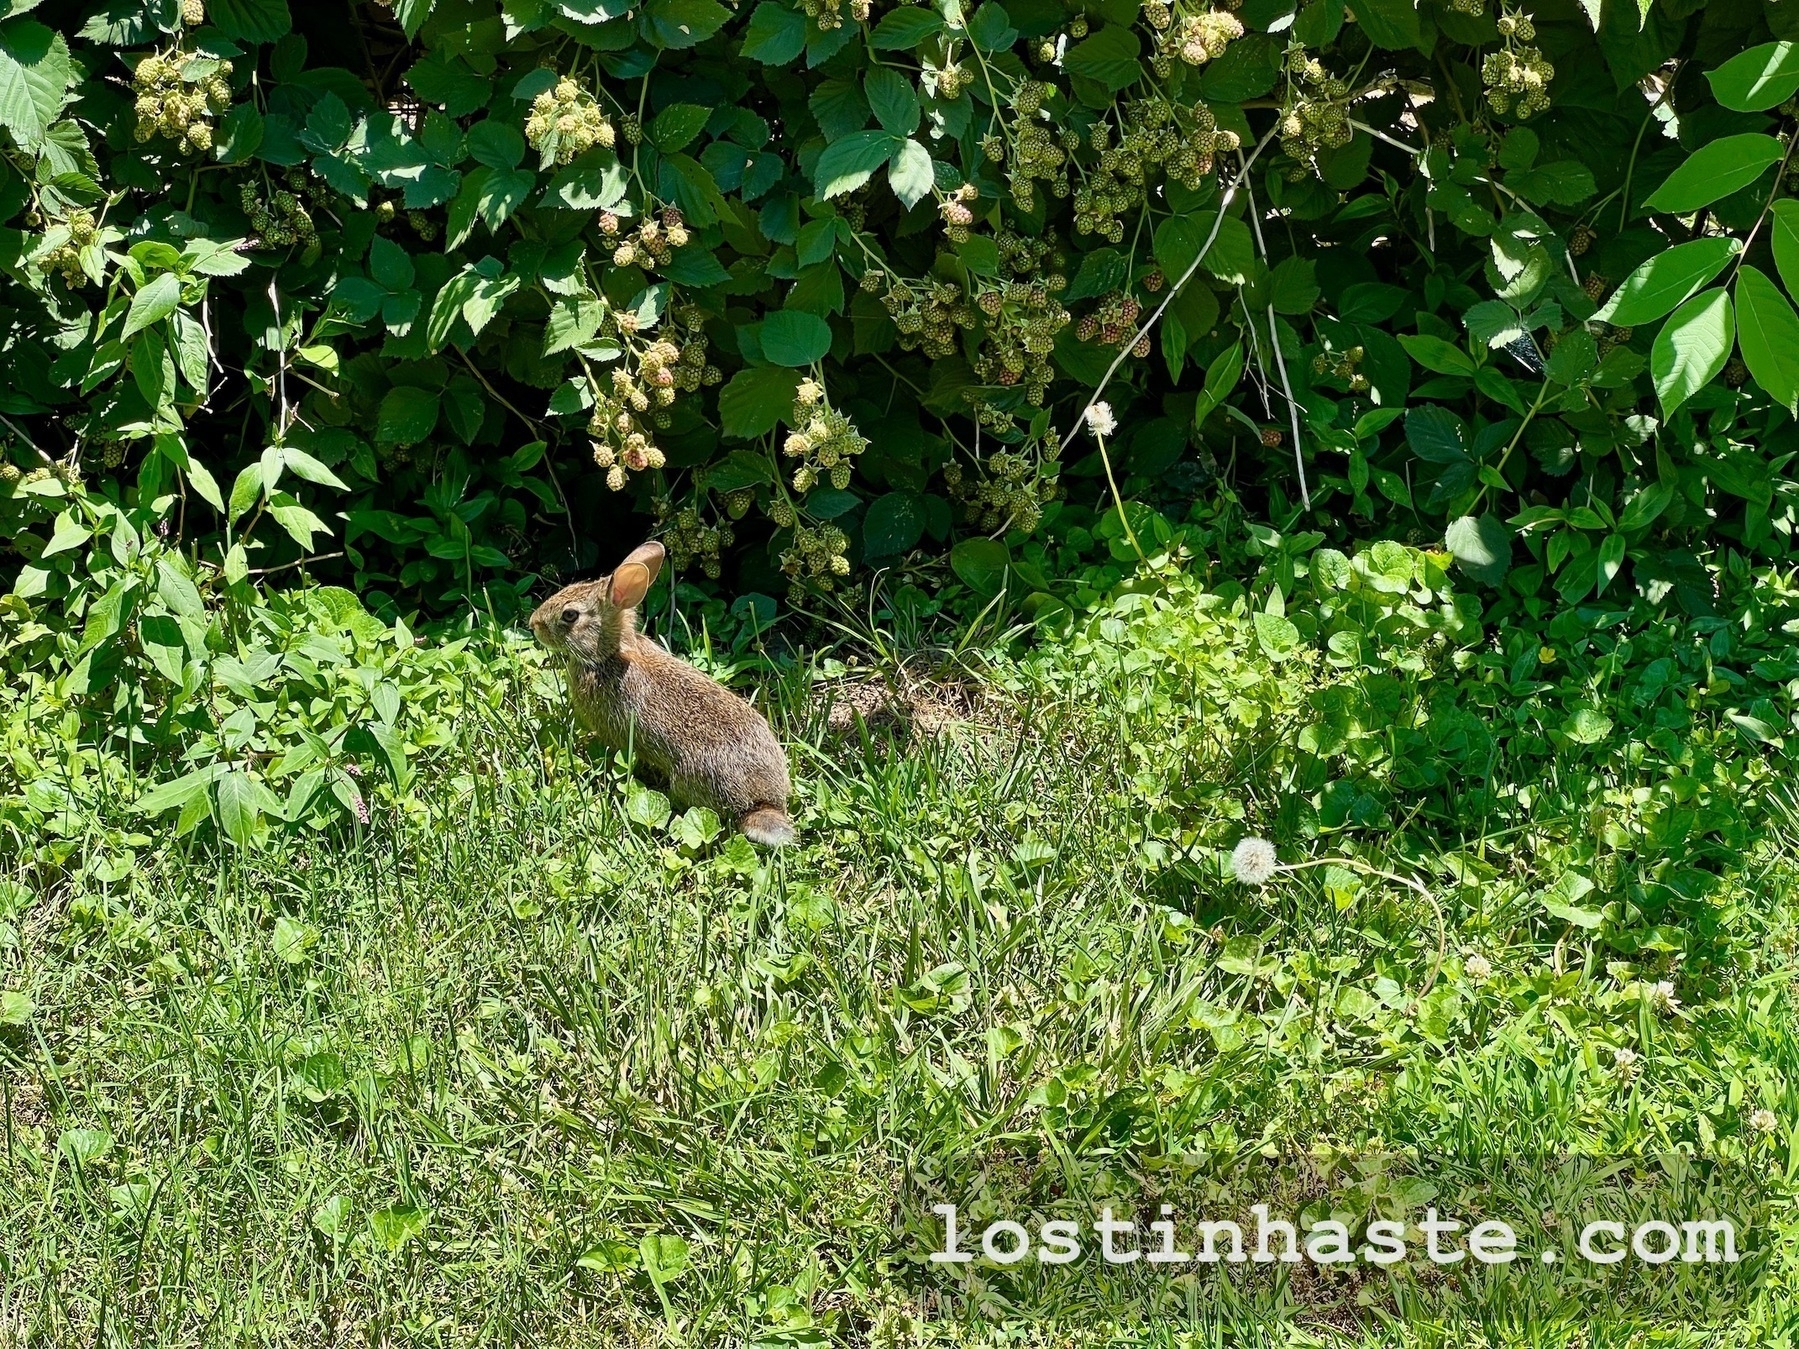 A brown rabbit sits in green grass near lush bushes under sunlight, with the text 'lostinhaste.com' overlaid at the bottom right.